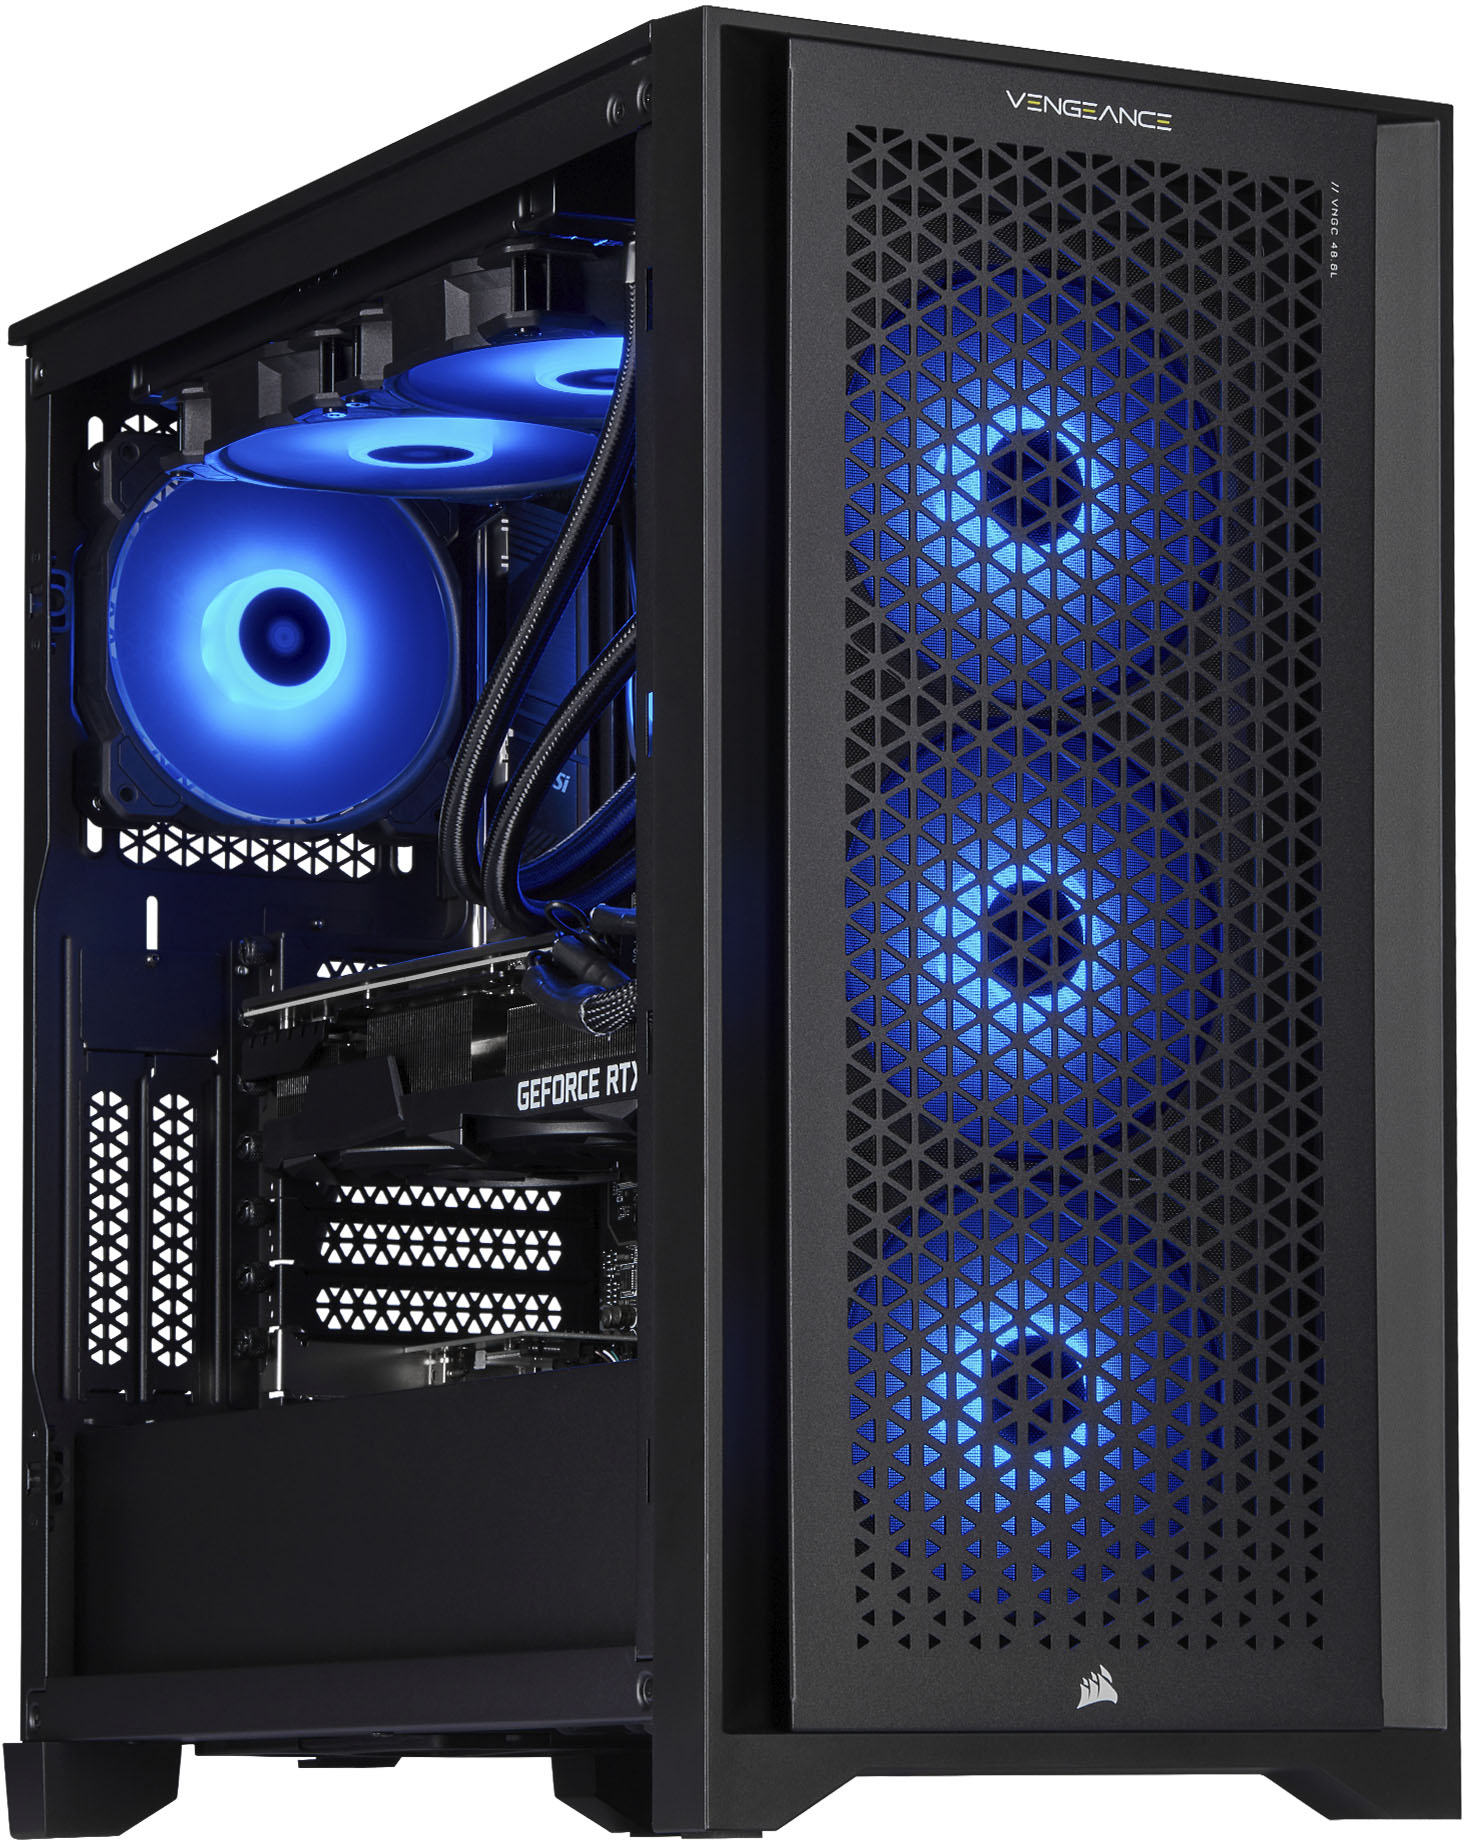 Pick up one of Corsair's best PC cases for $100 after a $65 discount